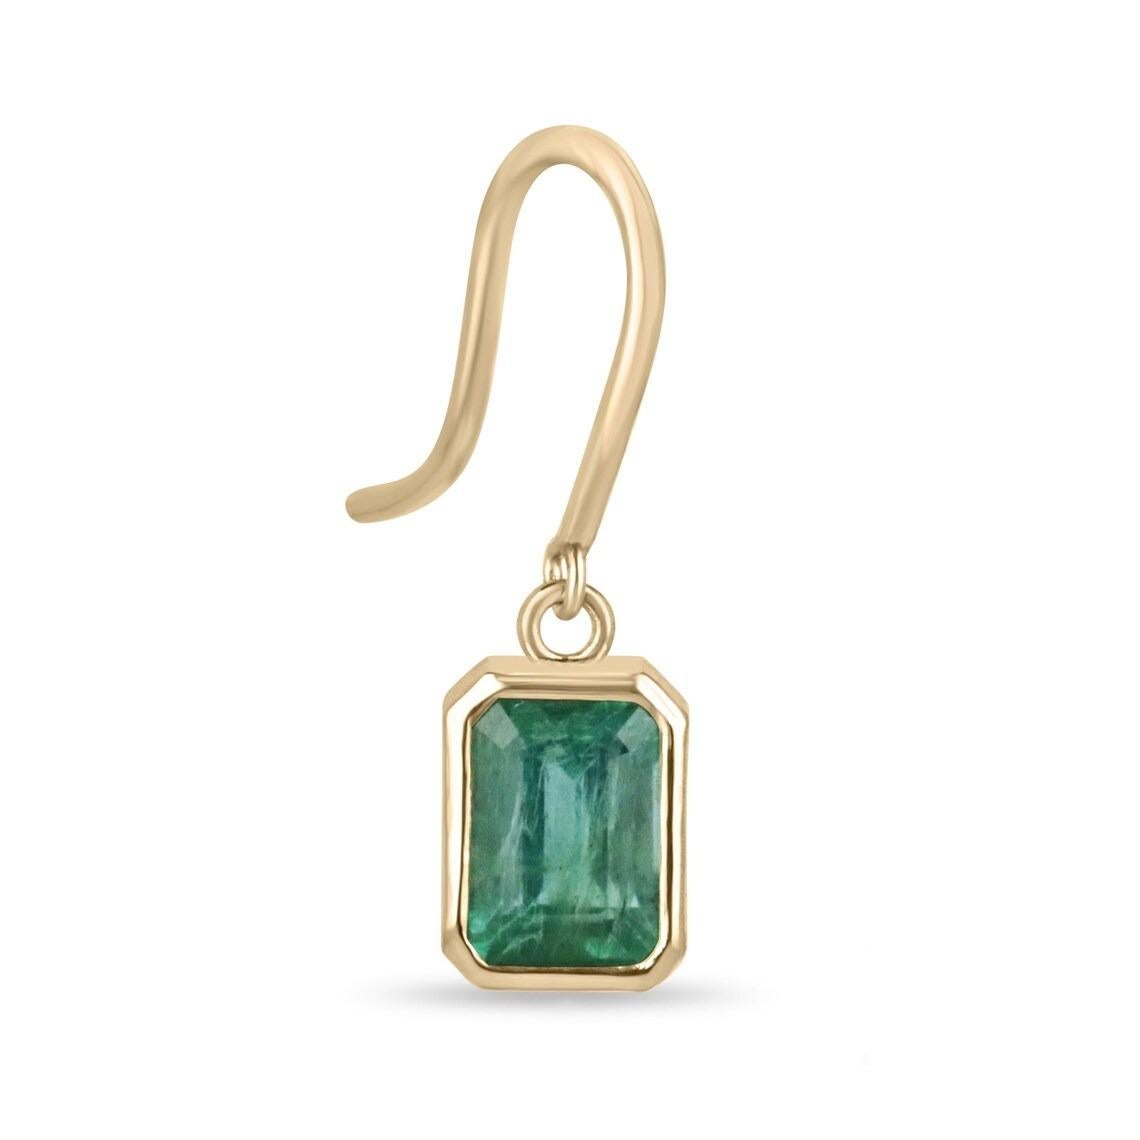 These emerald dangle earrings showcase two emerald cut emeralds with a combined weight of 2.20 carats. The emeralds exhibit a lovely dark lush green color with unique clarity and luster. They are elegantly bezel-set, providing a secure and sleek